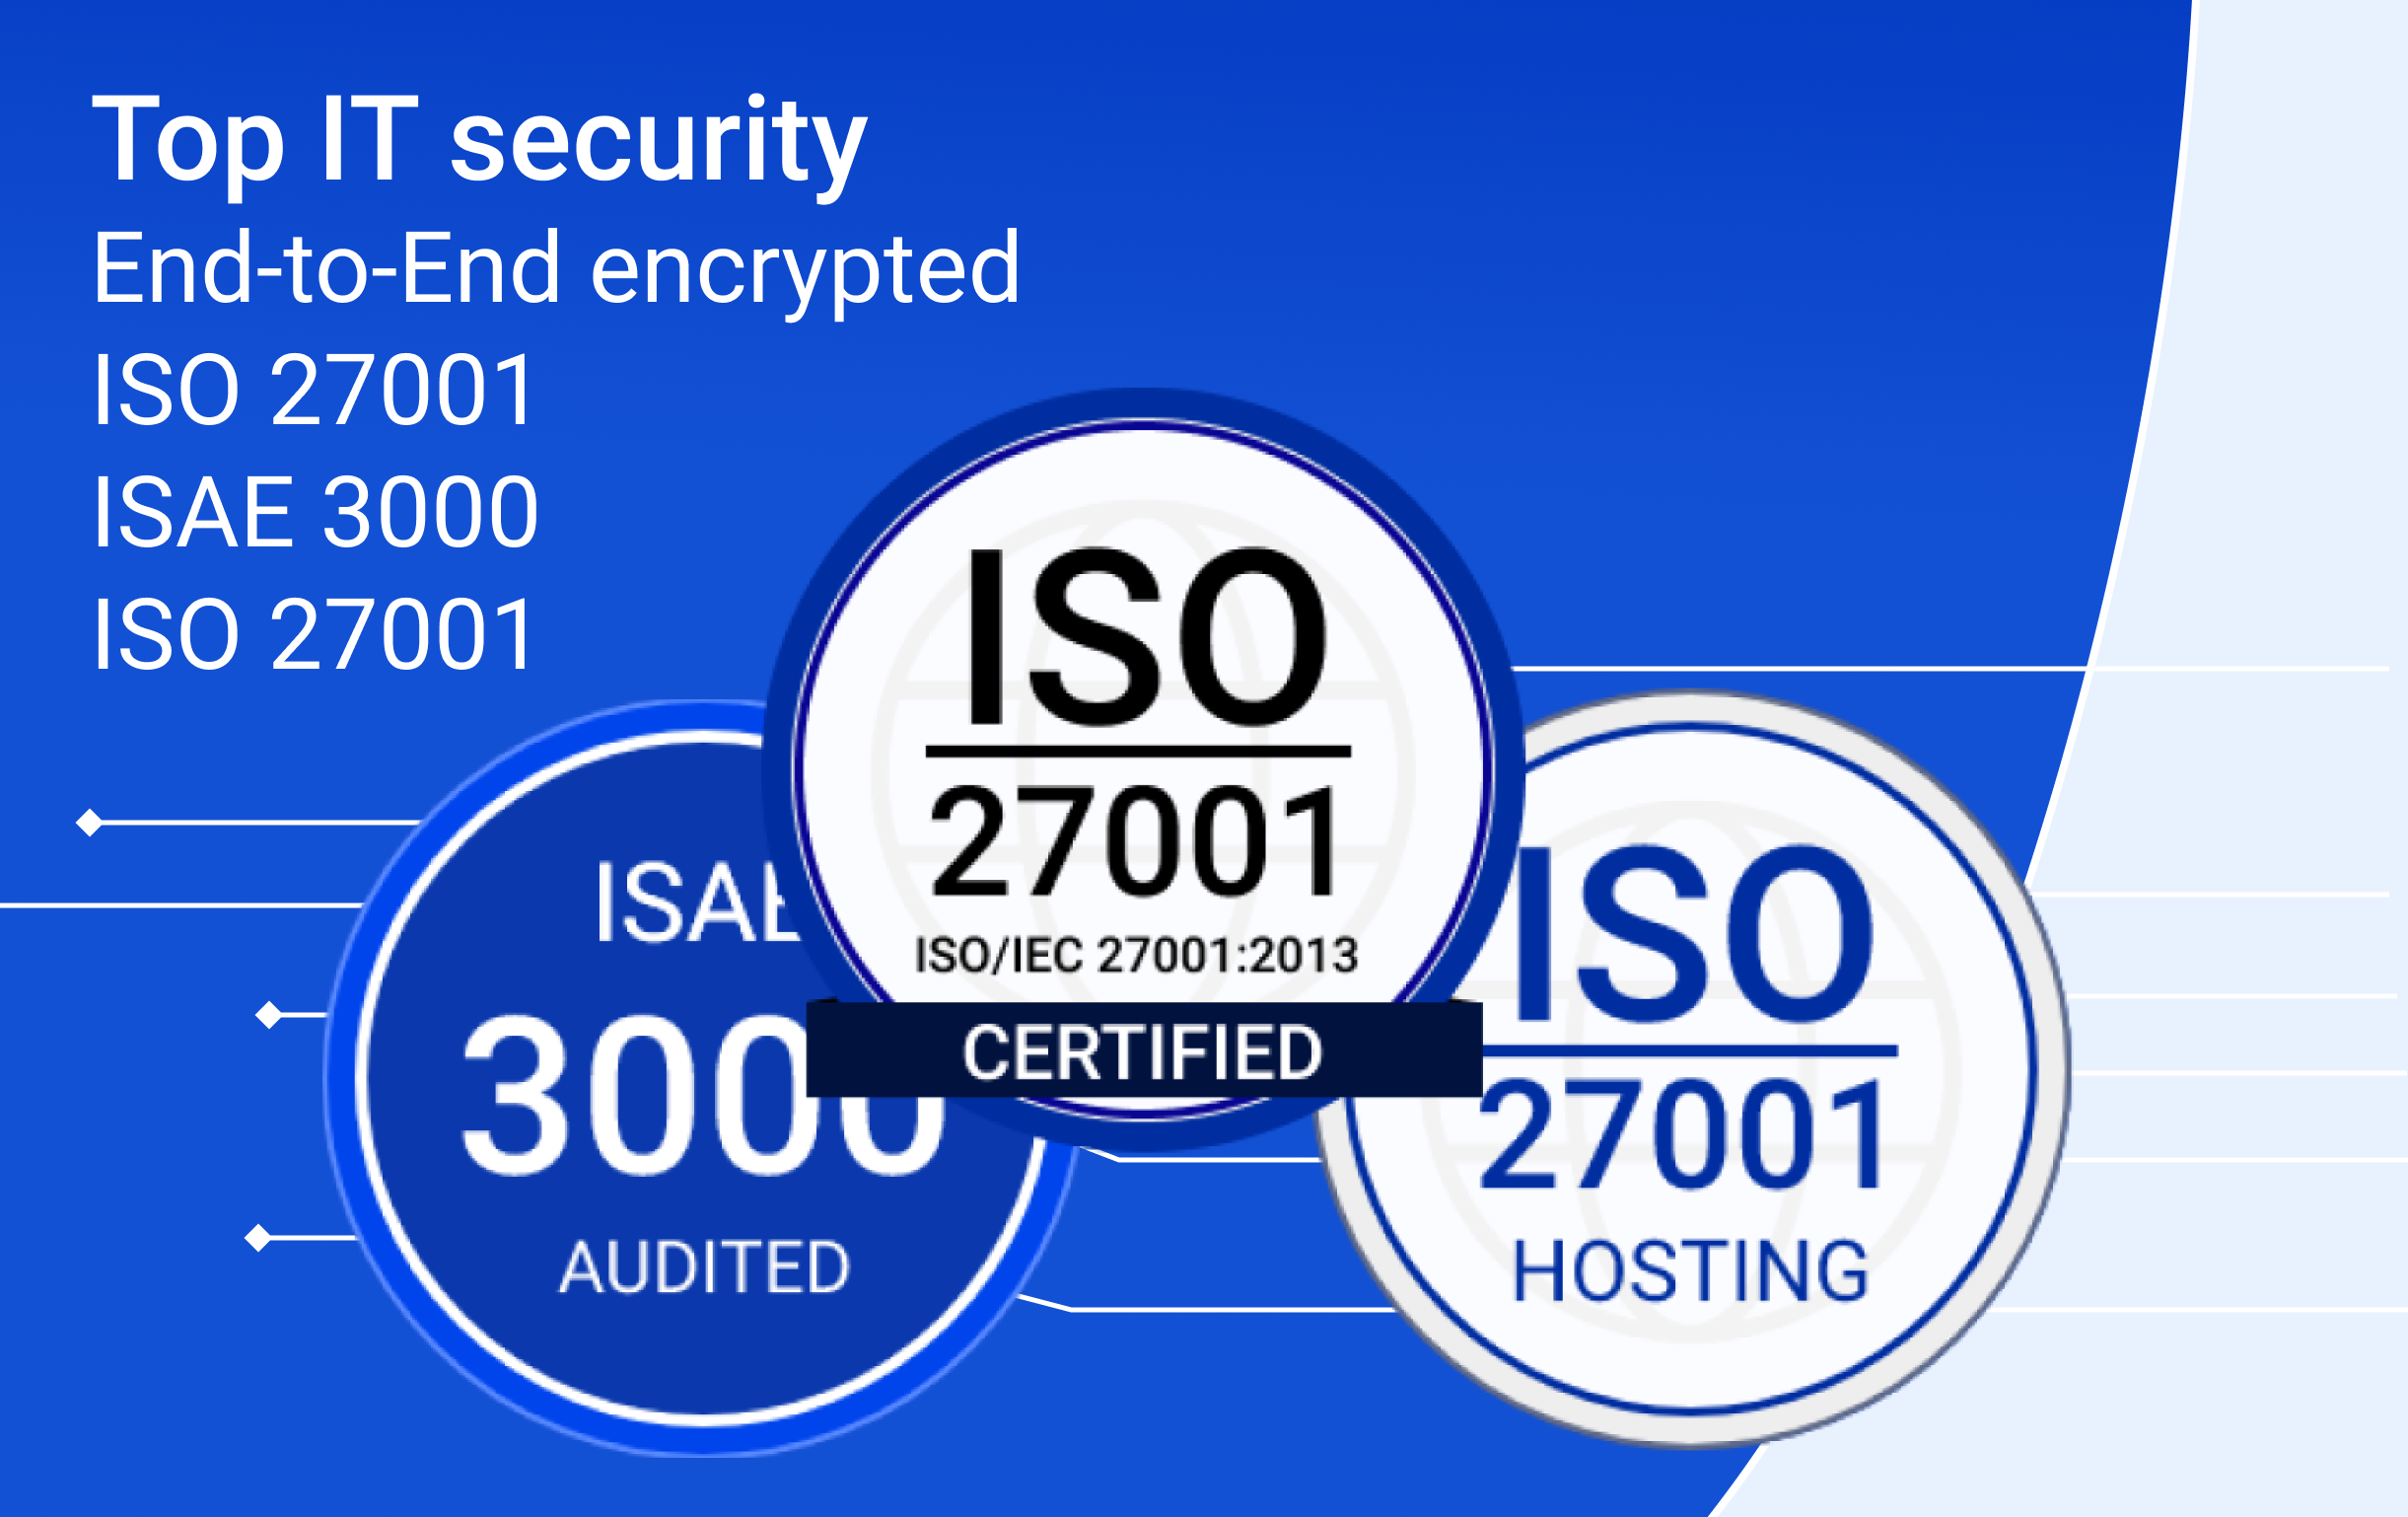 The highest security standards - ISO27001, ISAE3000, E2E encryption, penetration tested and meta-data removal